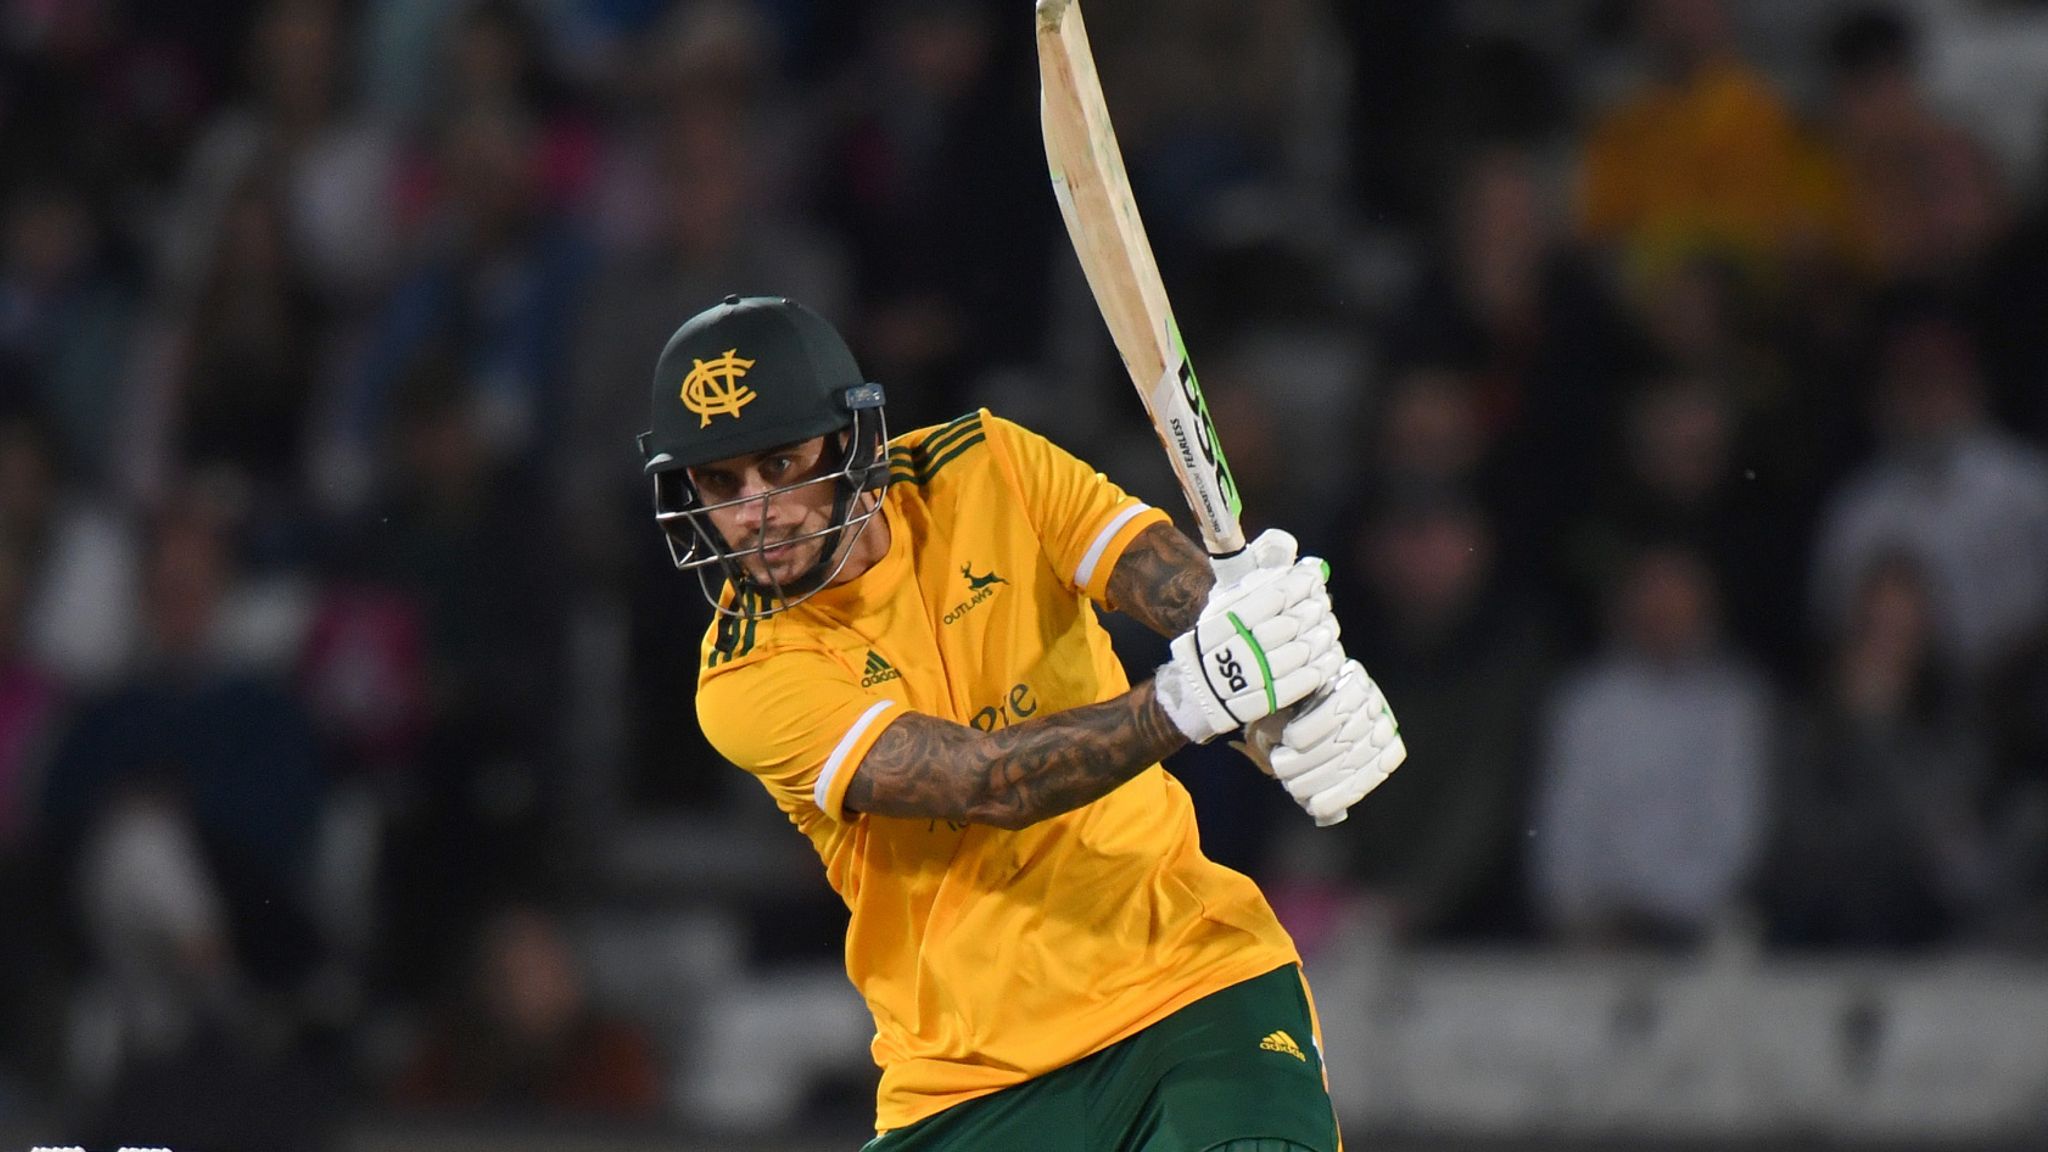 Alex Hales shows calm after the storm to see off Durham